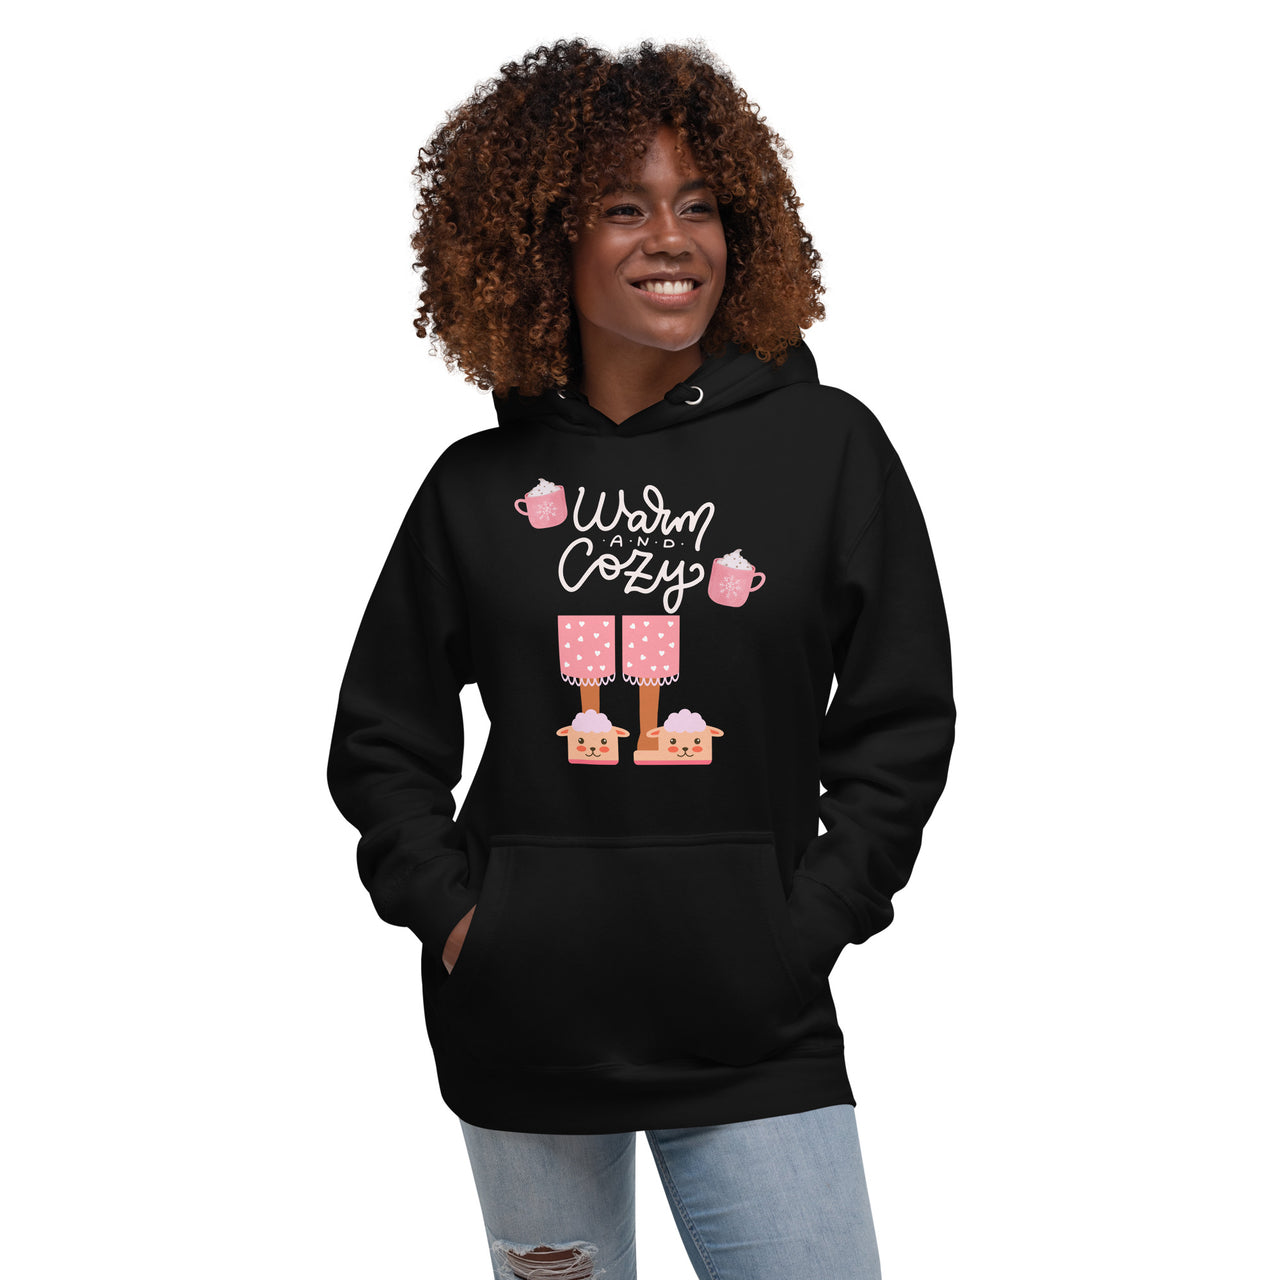 Warm And Cozy Fuzzy Slippers And Hot Chocolate Winter Holiday Unisex Hoodie Sweatshirt